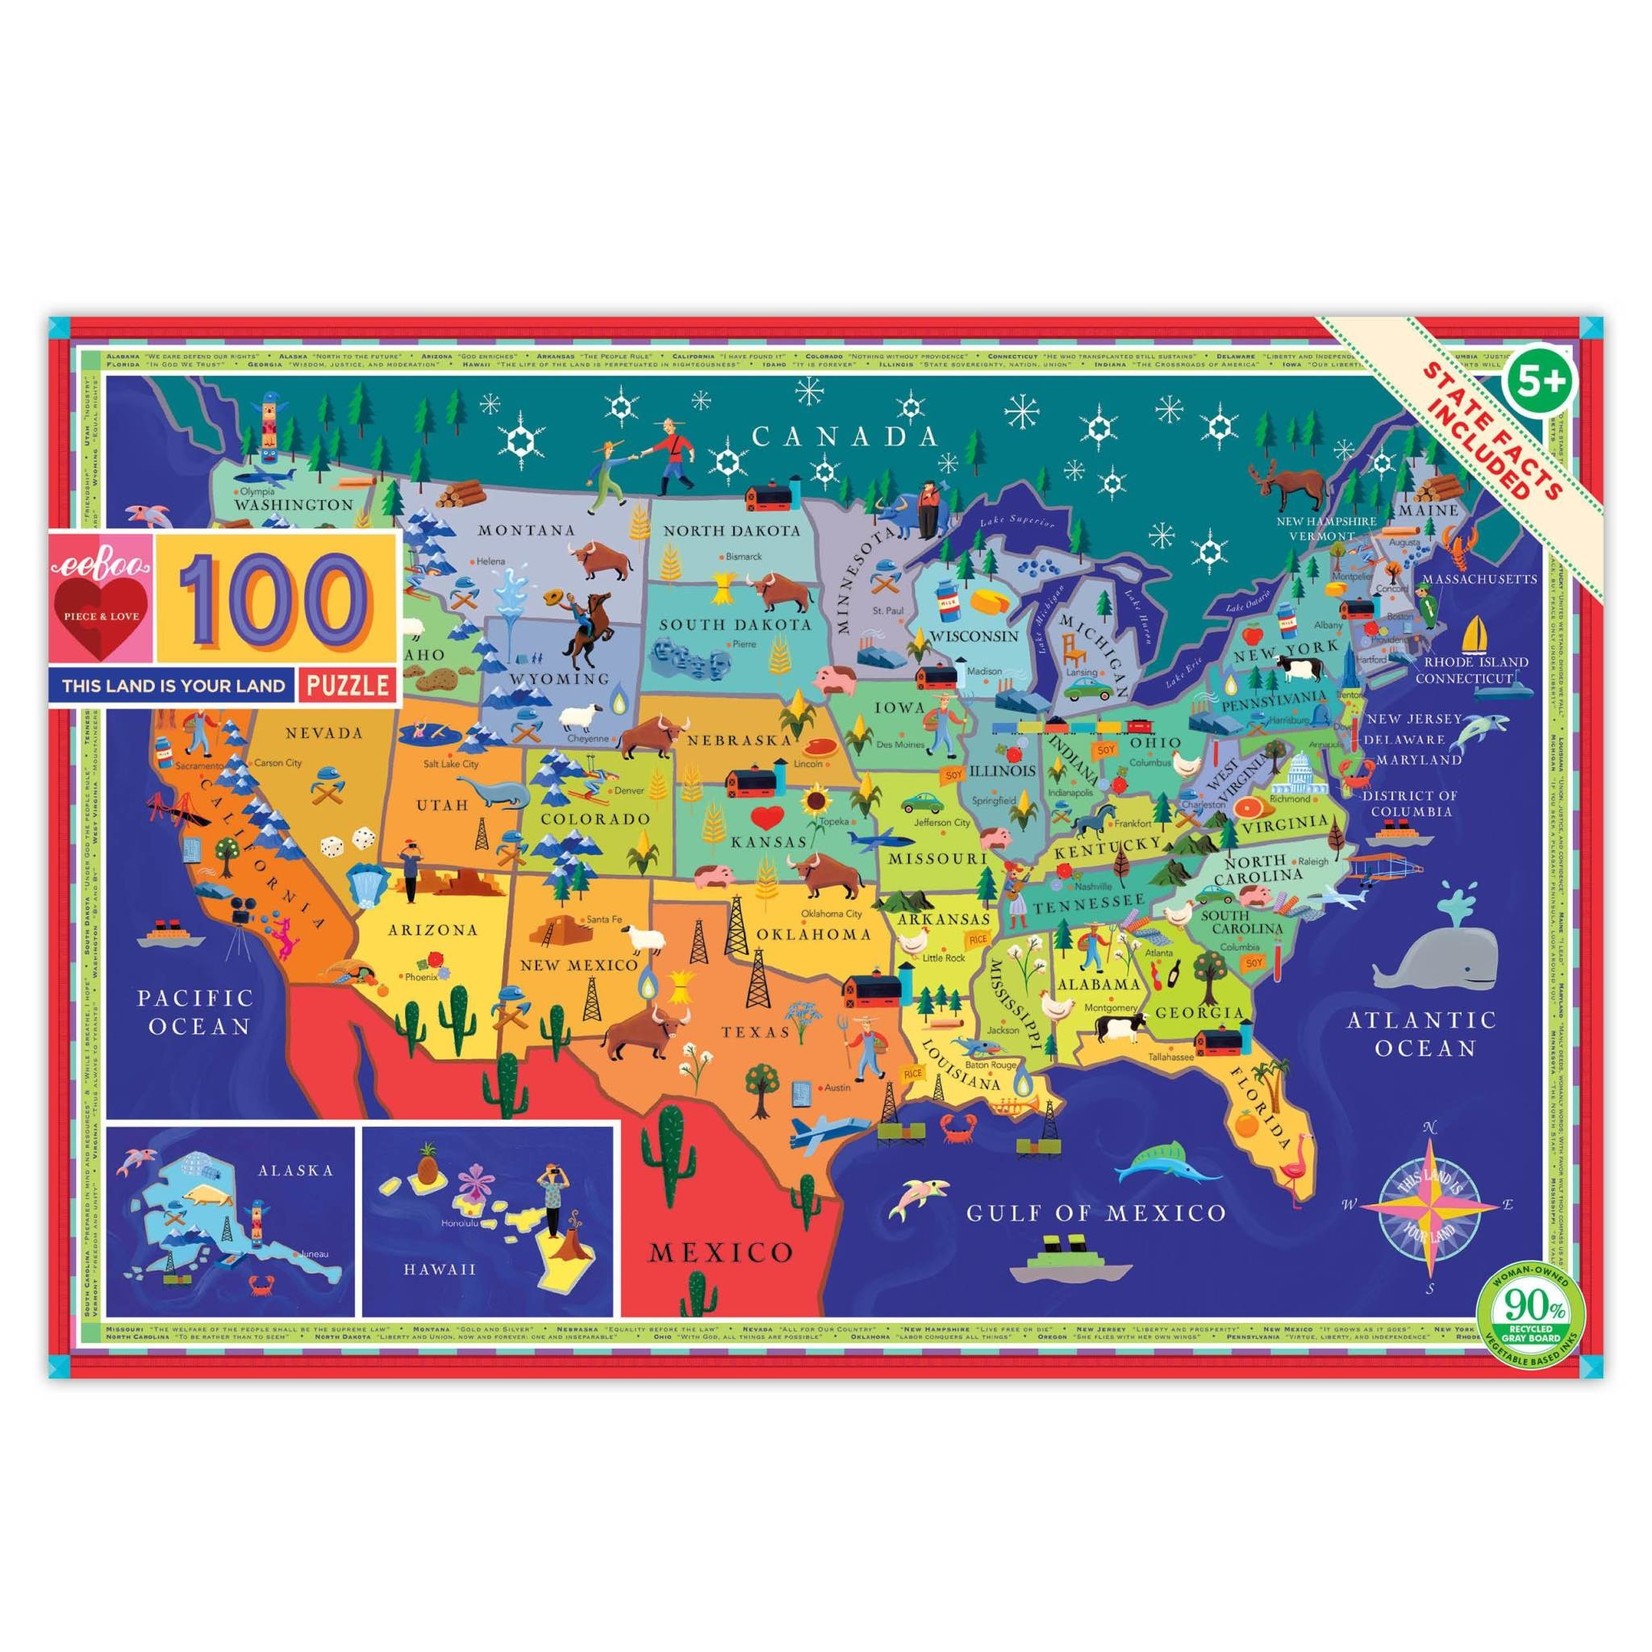 Eeboo This Land is Your Land, 100-Piece Jigsaw Puzzle